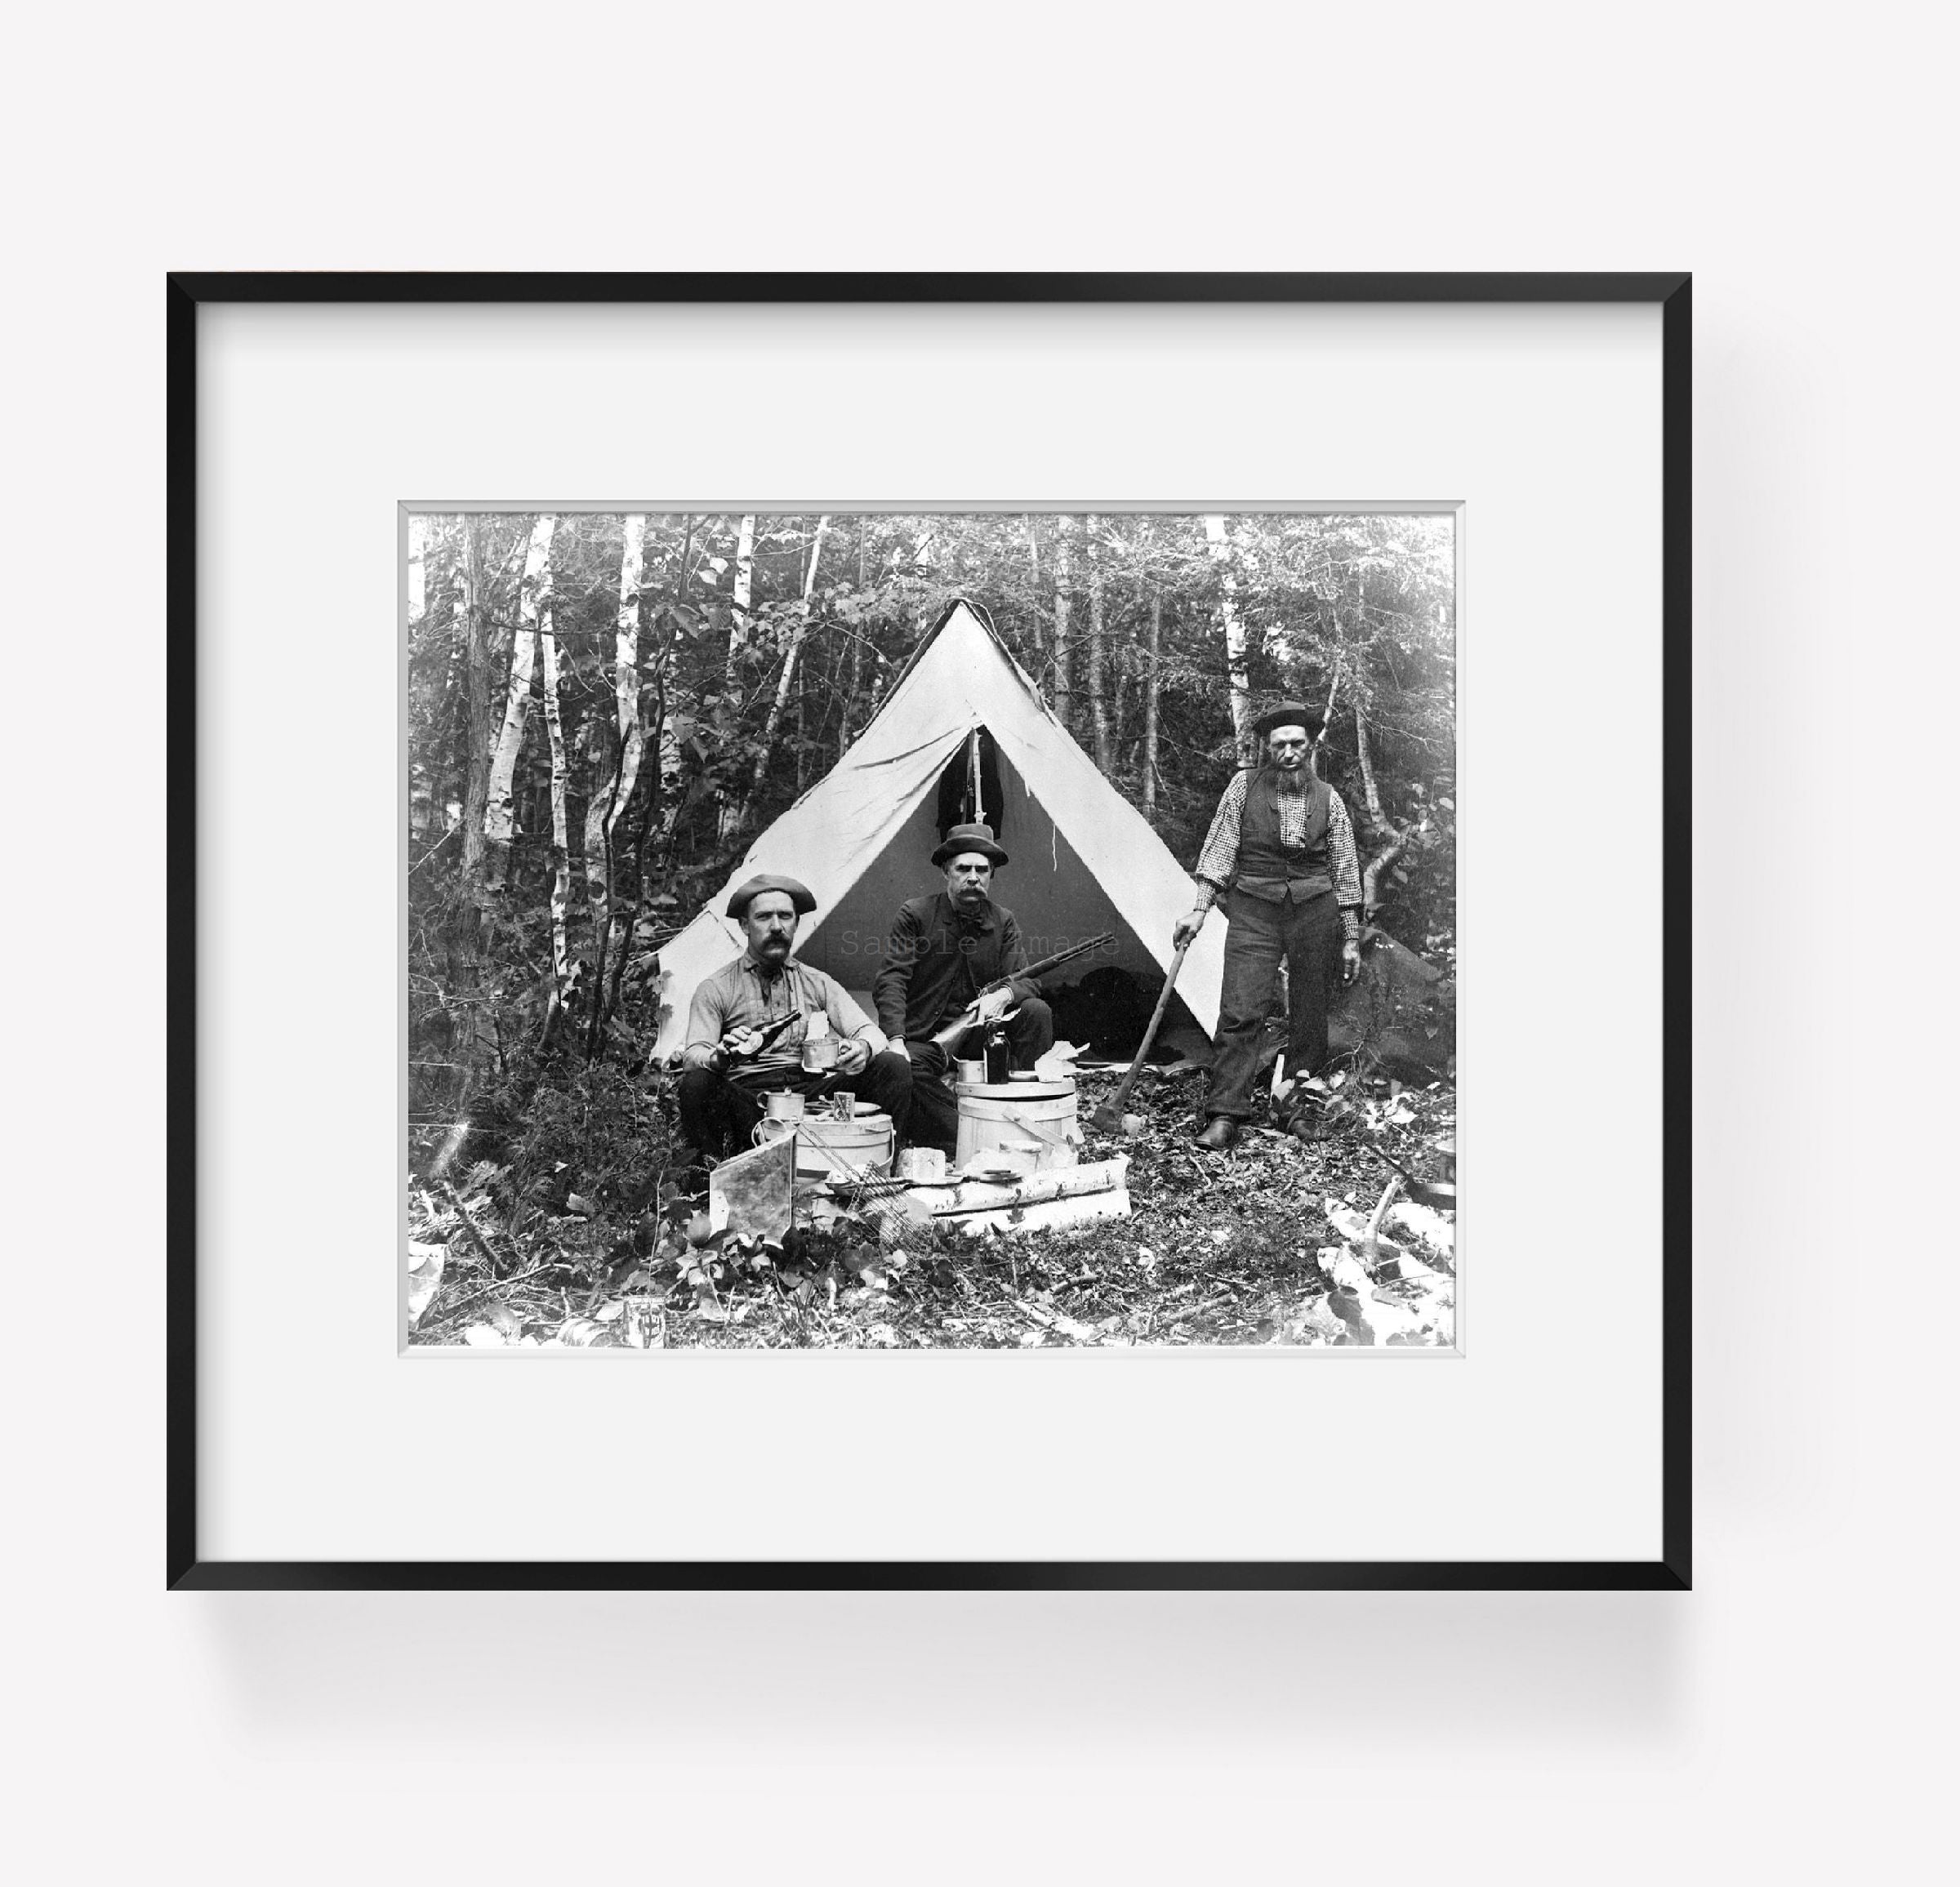 Photo: Camp at Norcross Brook, axe, rifle, man pouring drink, tent, Camping, Maine, ME,